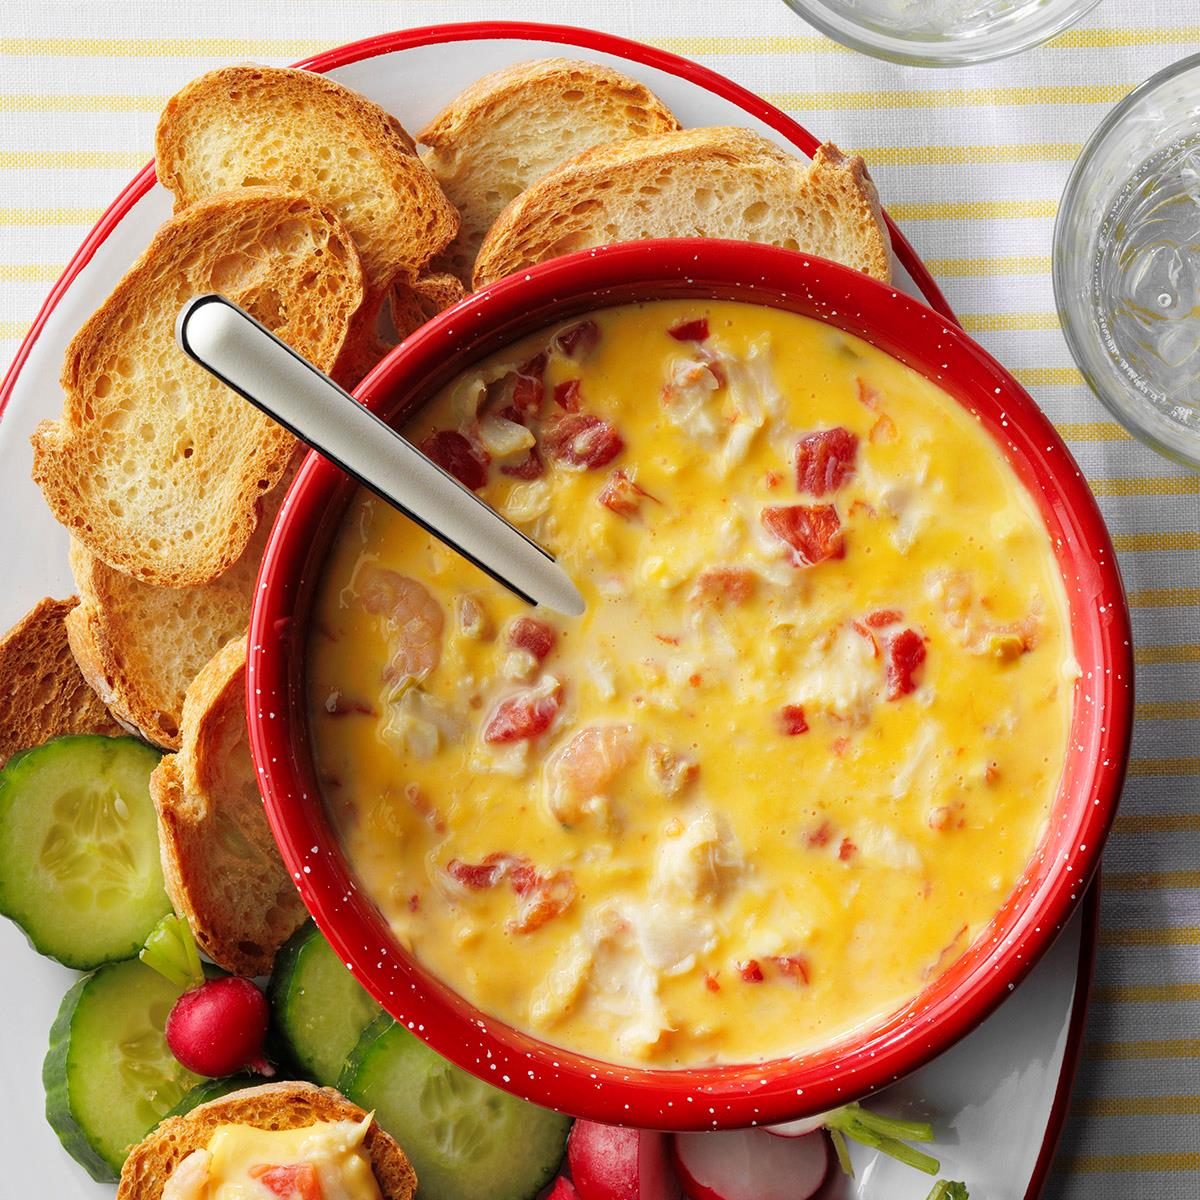 https://www.tasteofhome.com/wp-content/uploads/2018/01/Seafood-Cheese-Dip_EXPS_SCSBZ21_49694_E01_20_2b-3.jpg